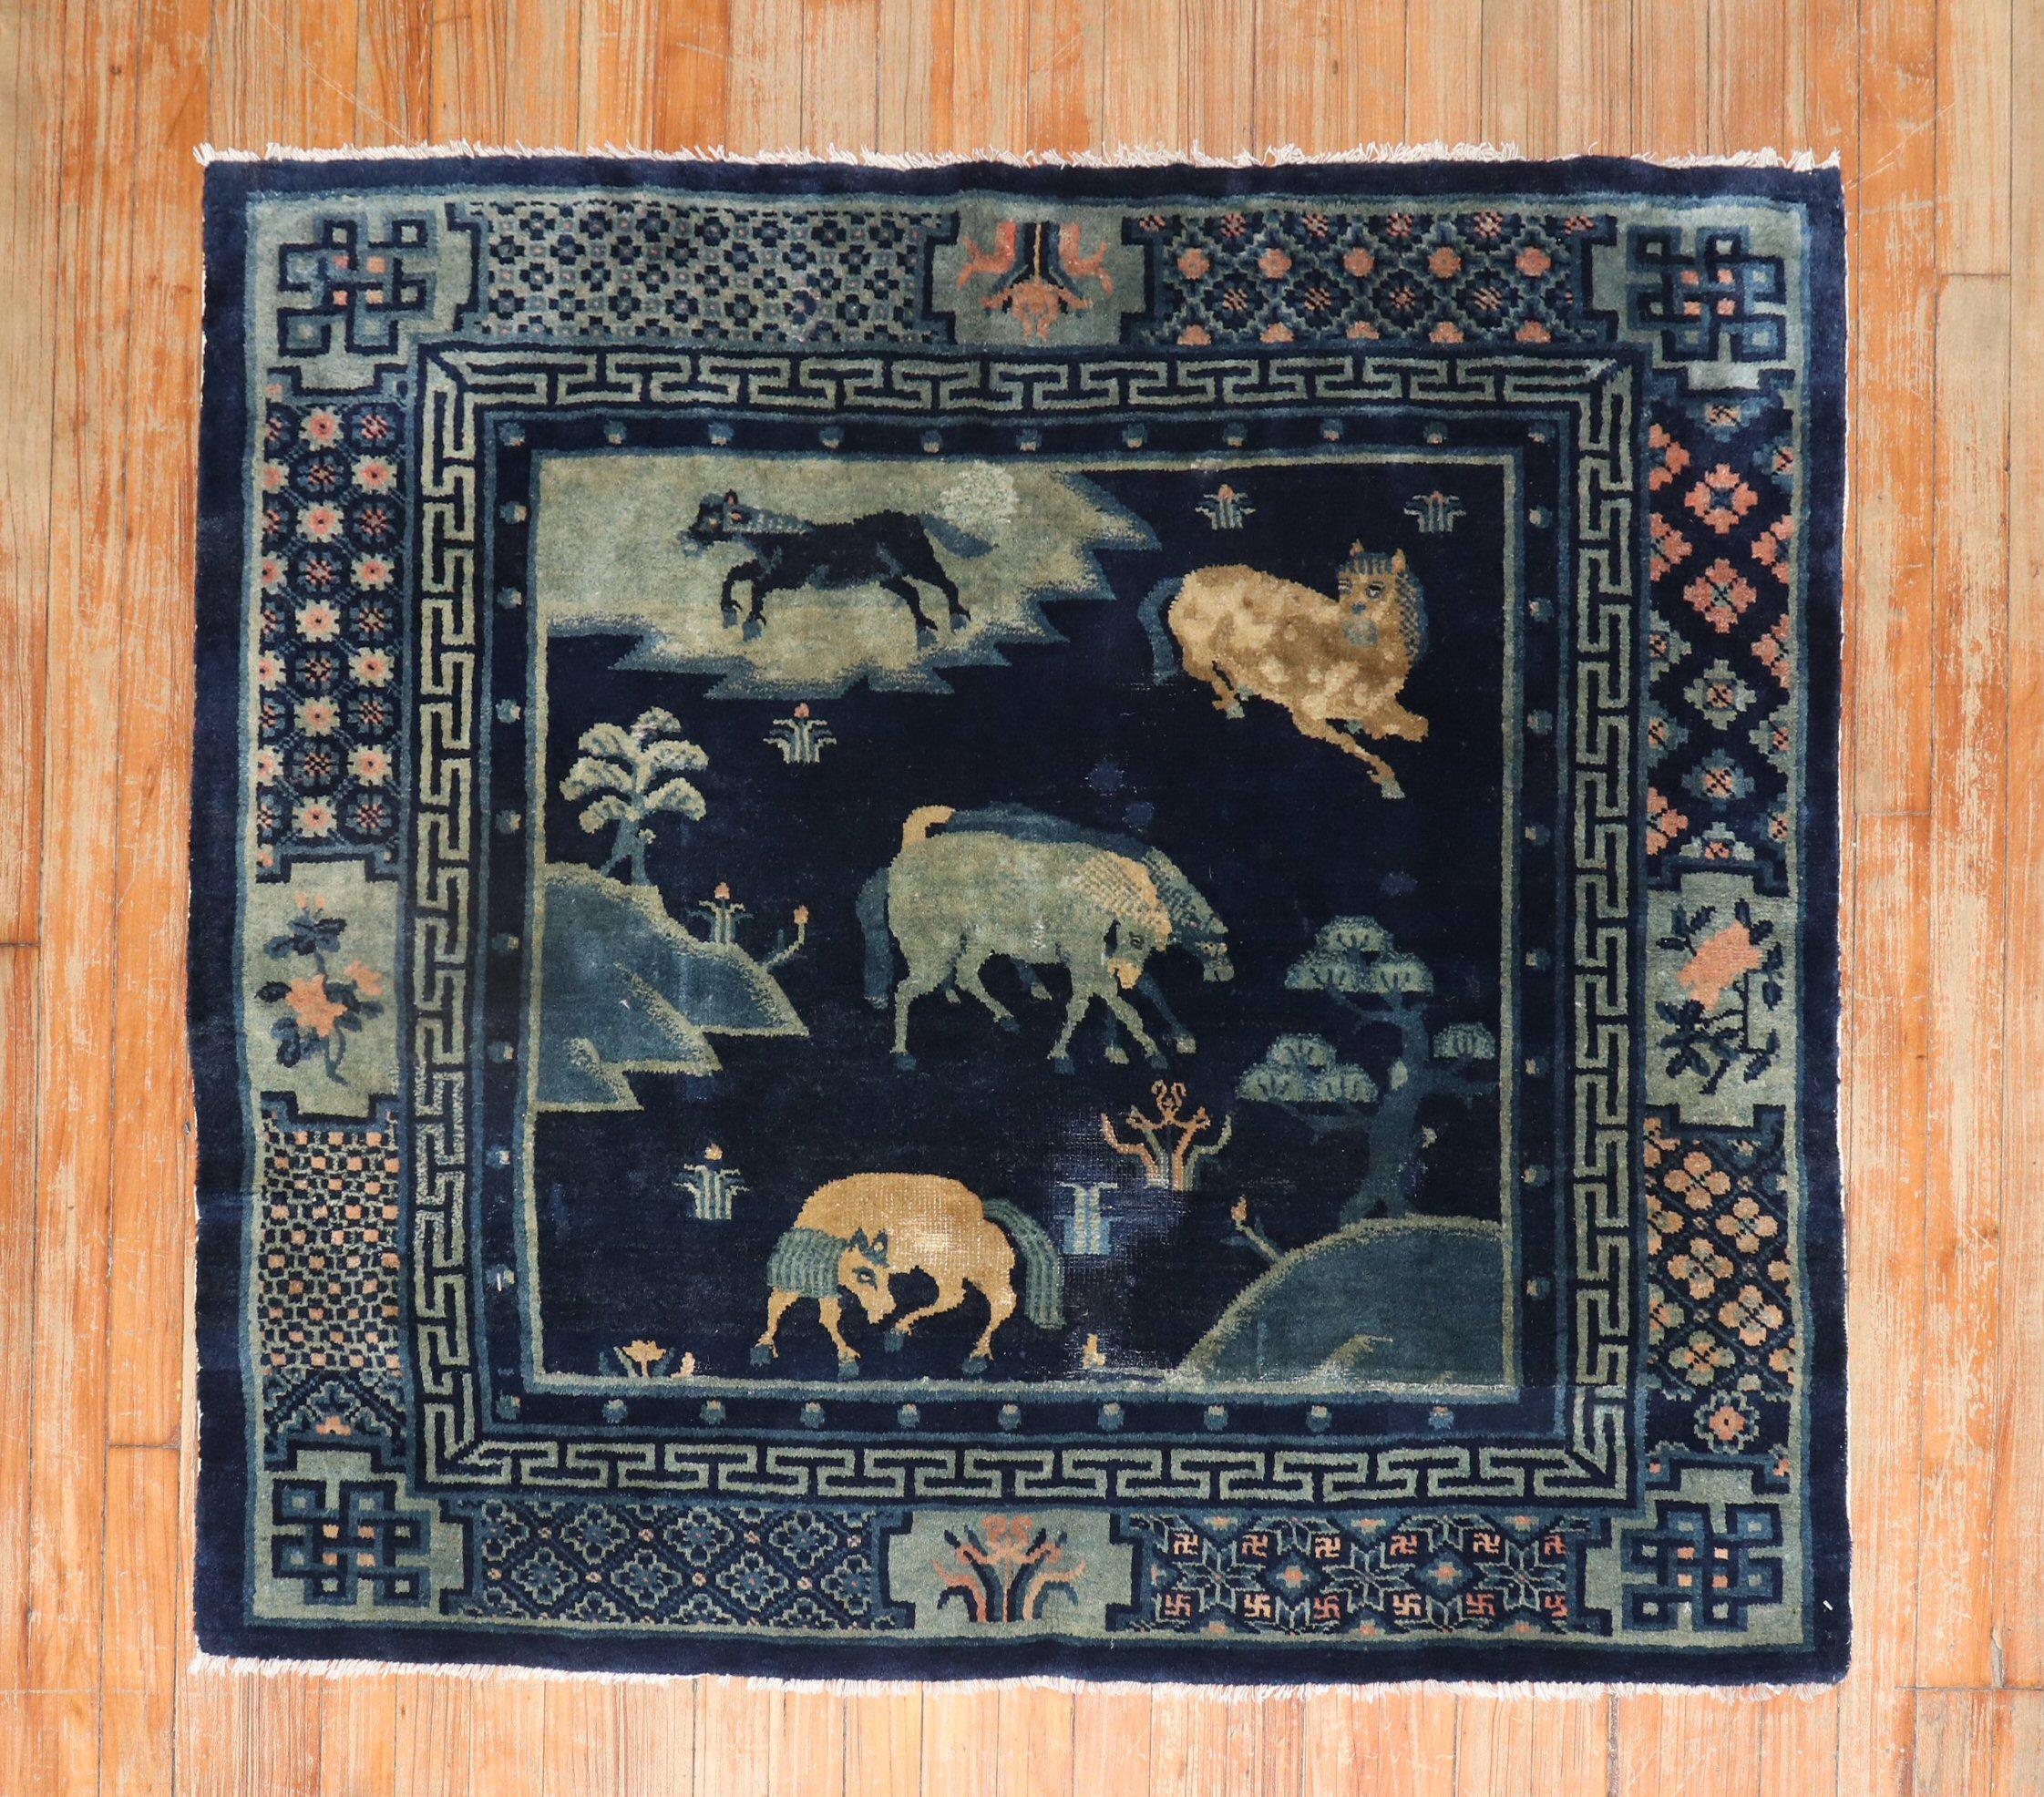 An early-20th century conversational Chinese pictorial rug with a herd of horses on a navy field 

Measures: 3'8